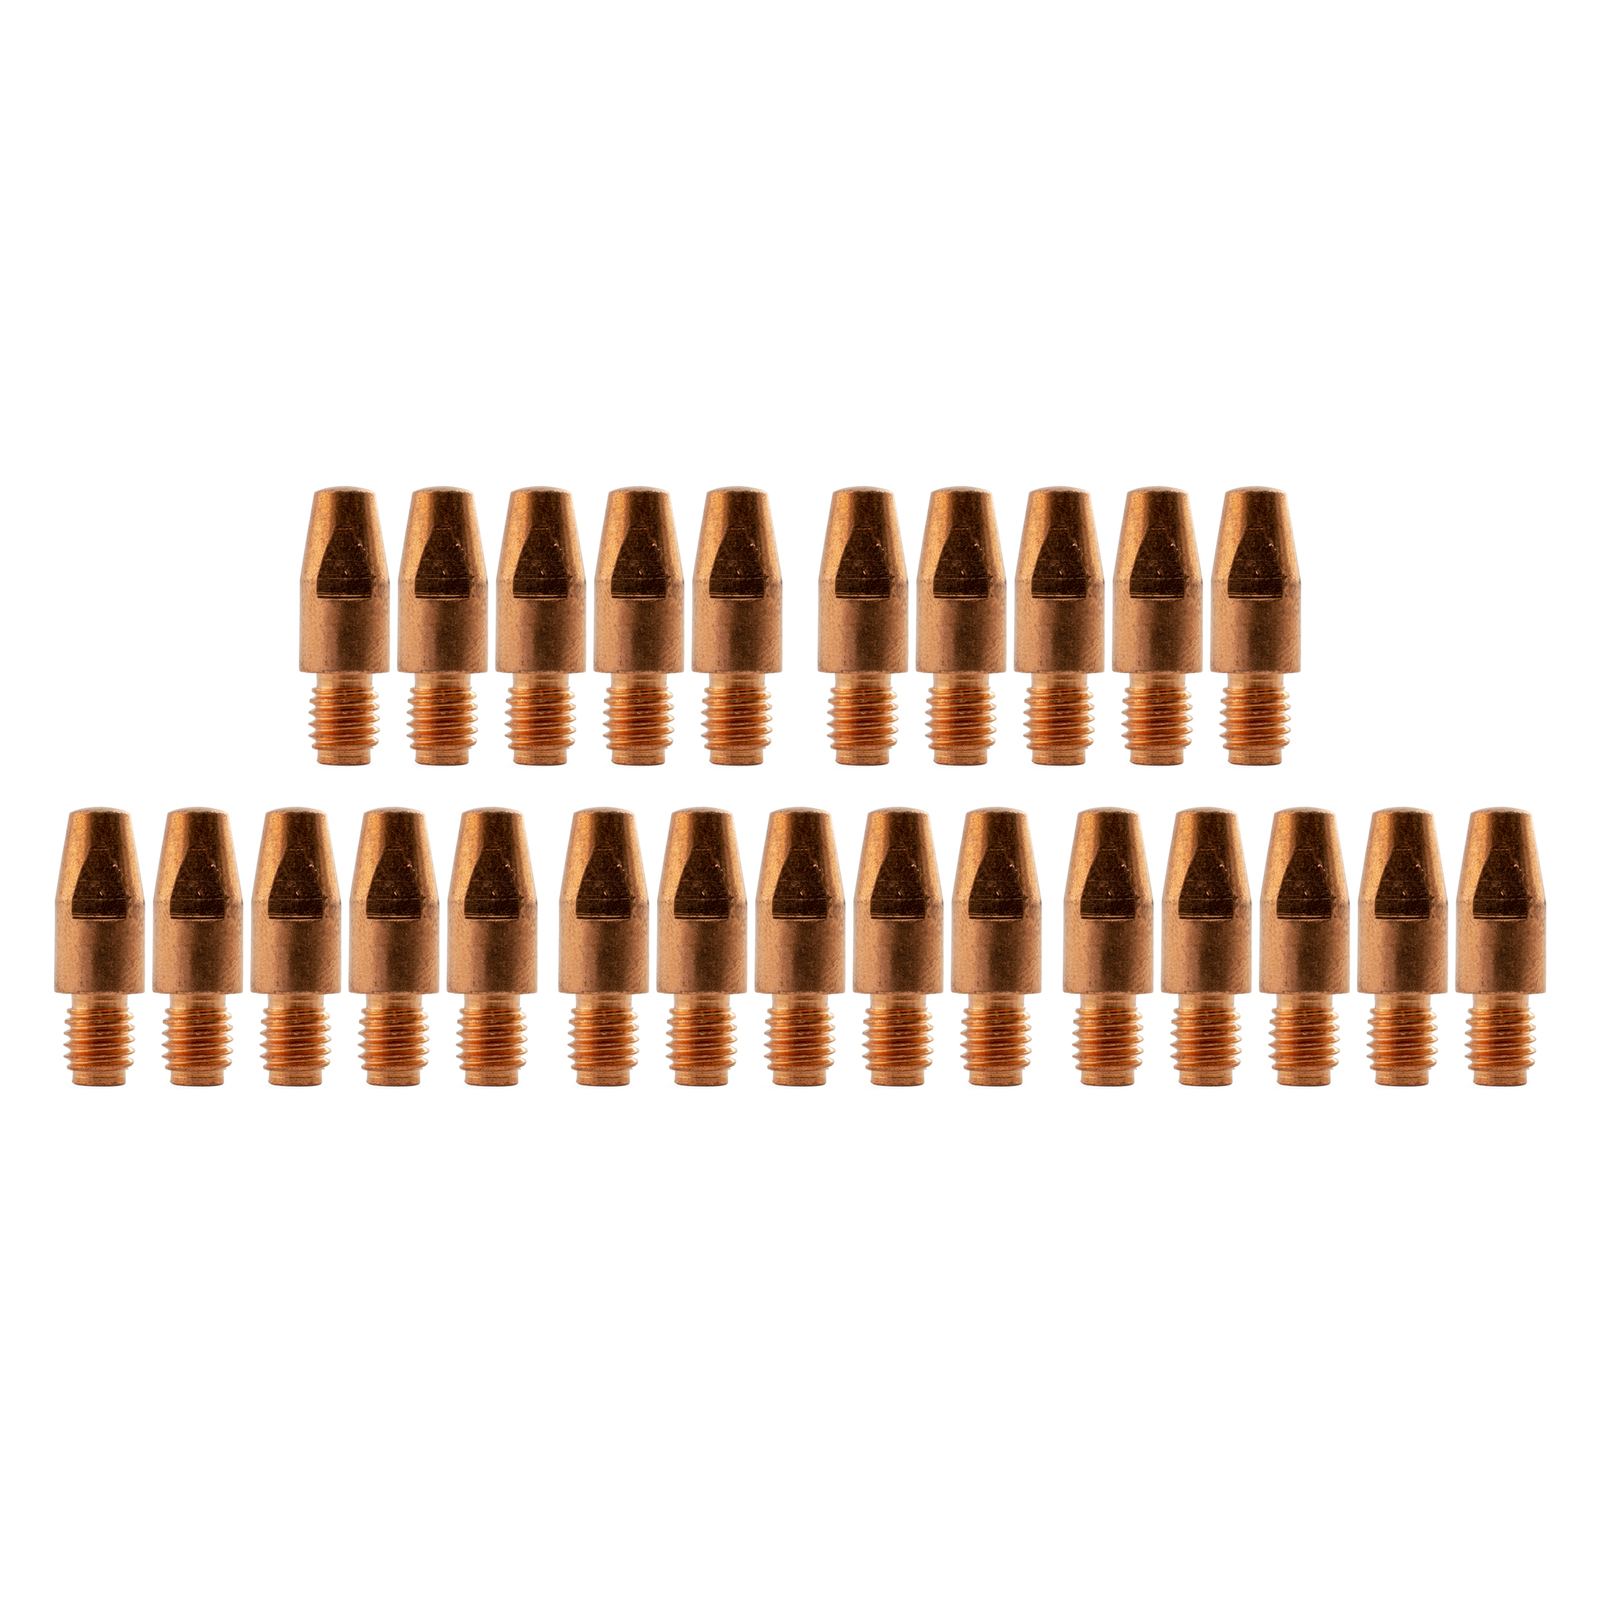 Binzel Style MIG Contact Tips 1.2mm - 25 pack - M8 x 10mm x 1.2mm